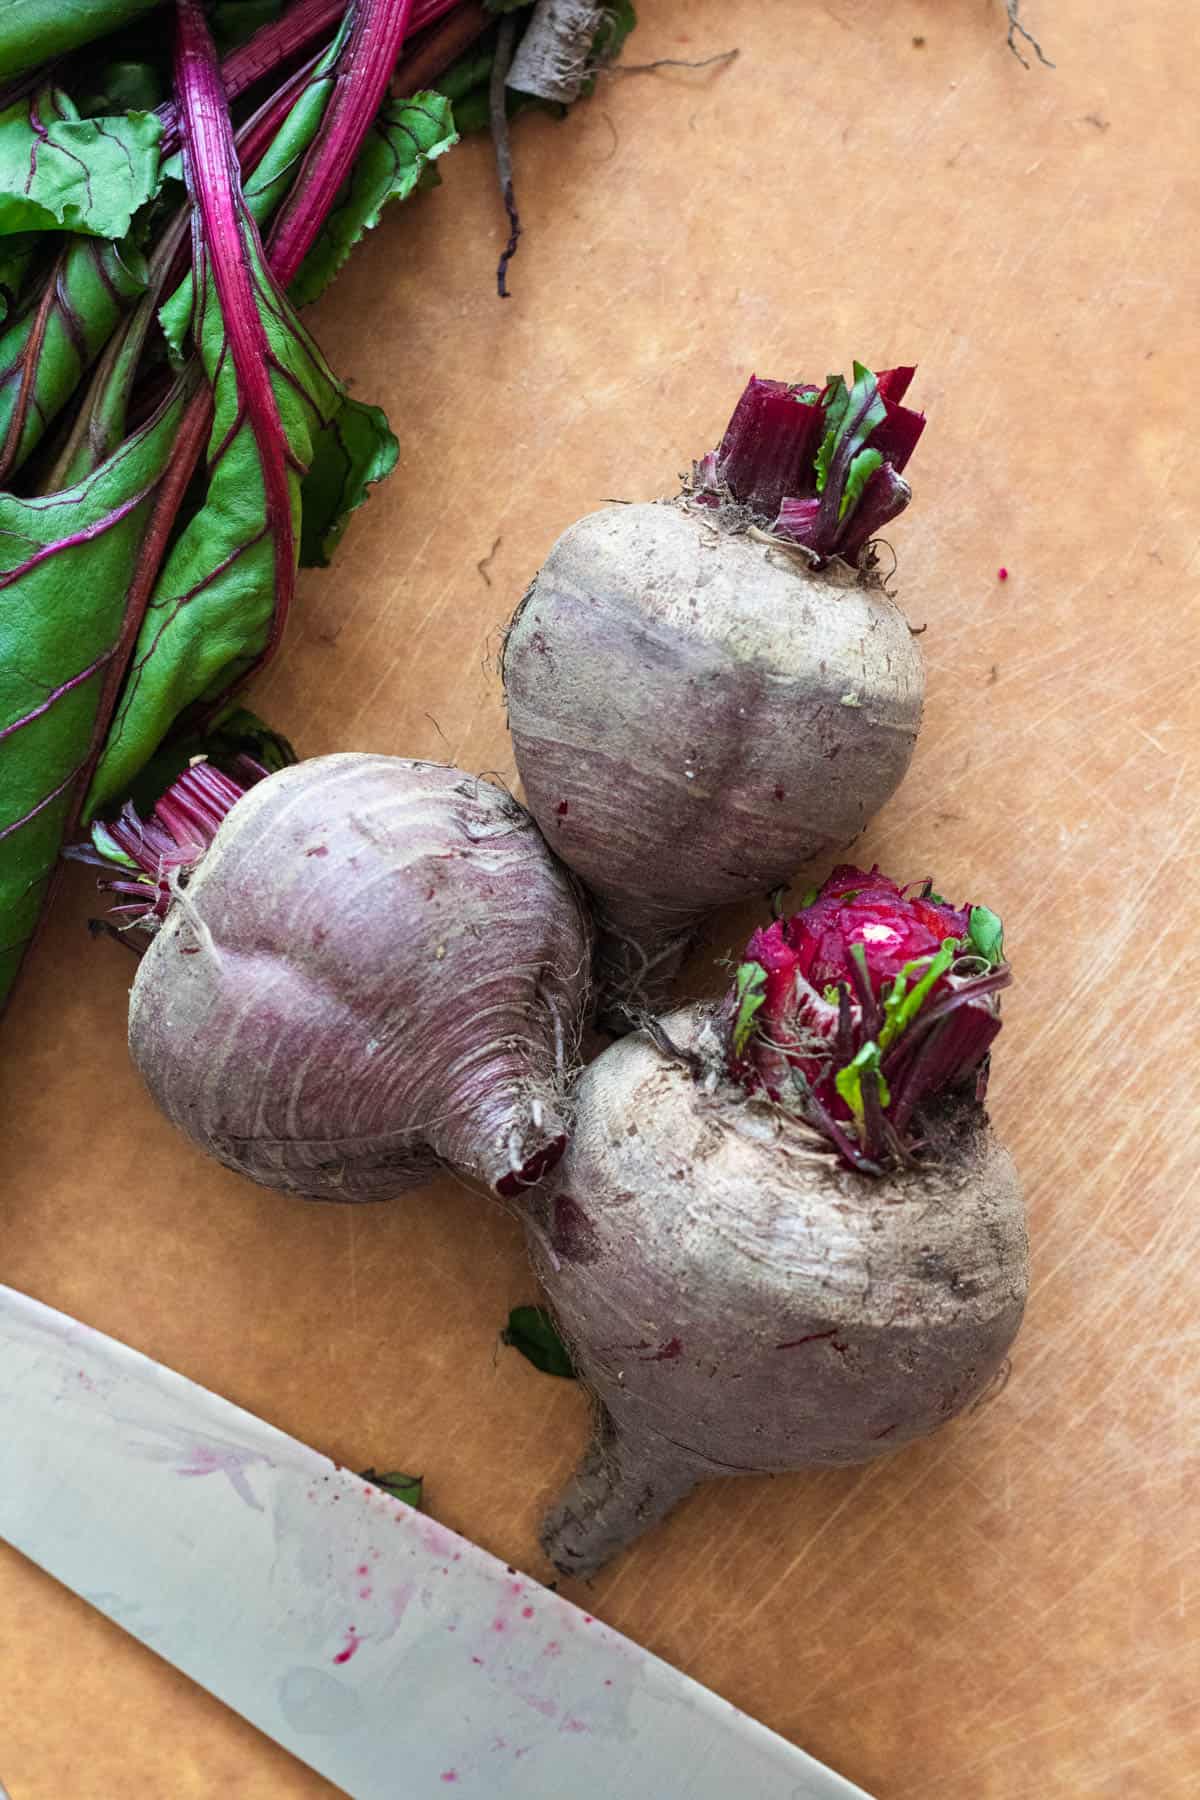 Beets with roots and stems cut off